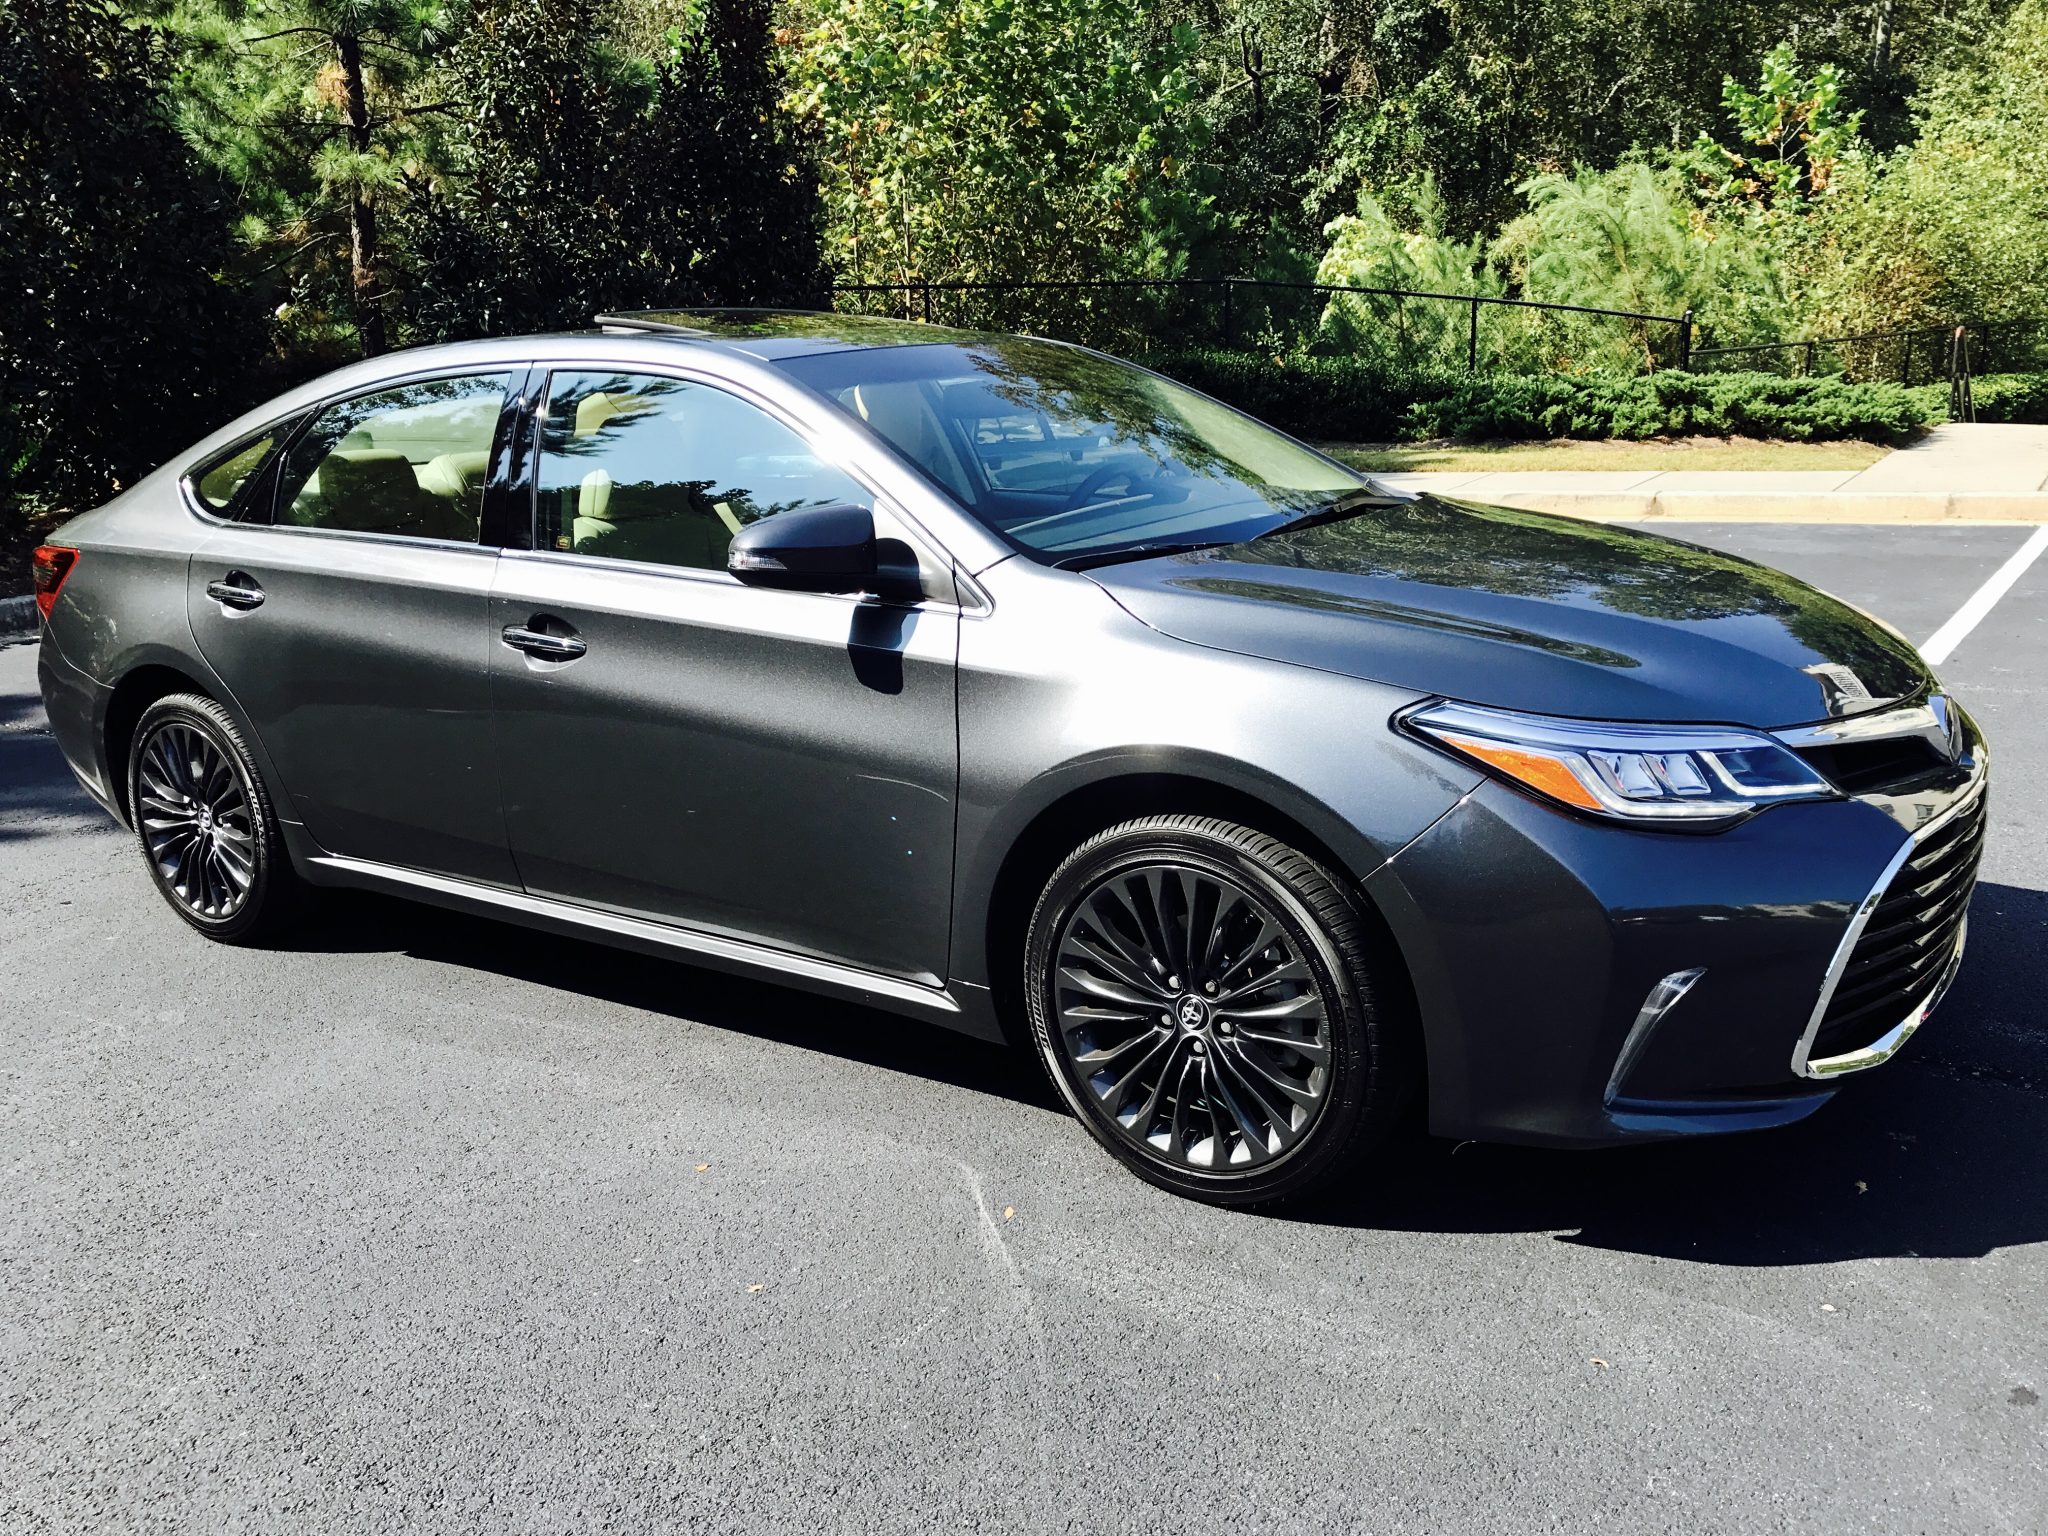 The Toyota Avalon Is Such A Lady Car!